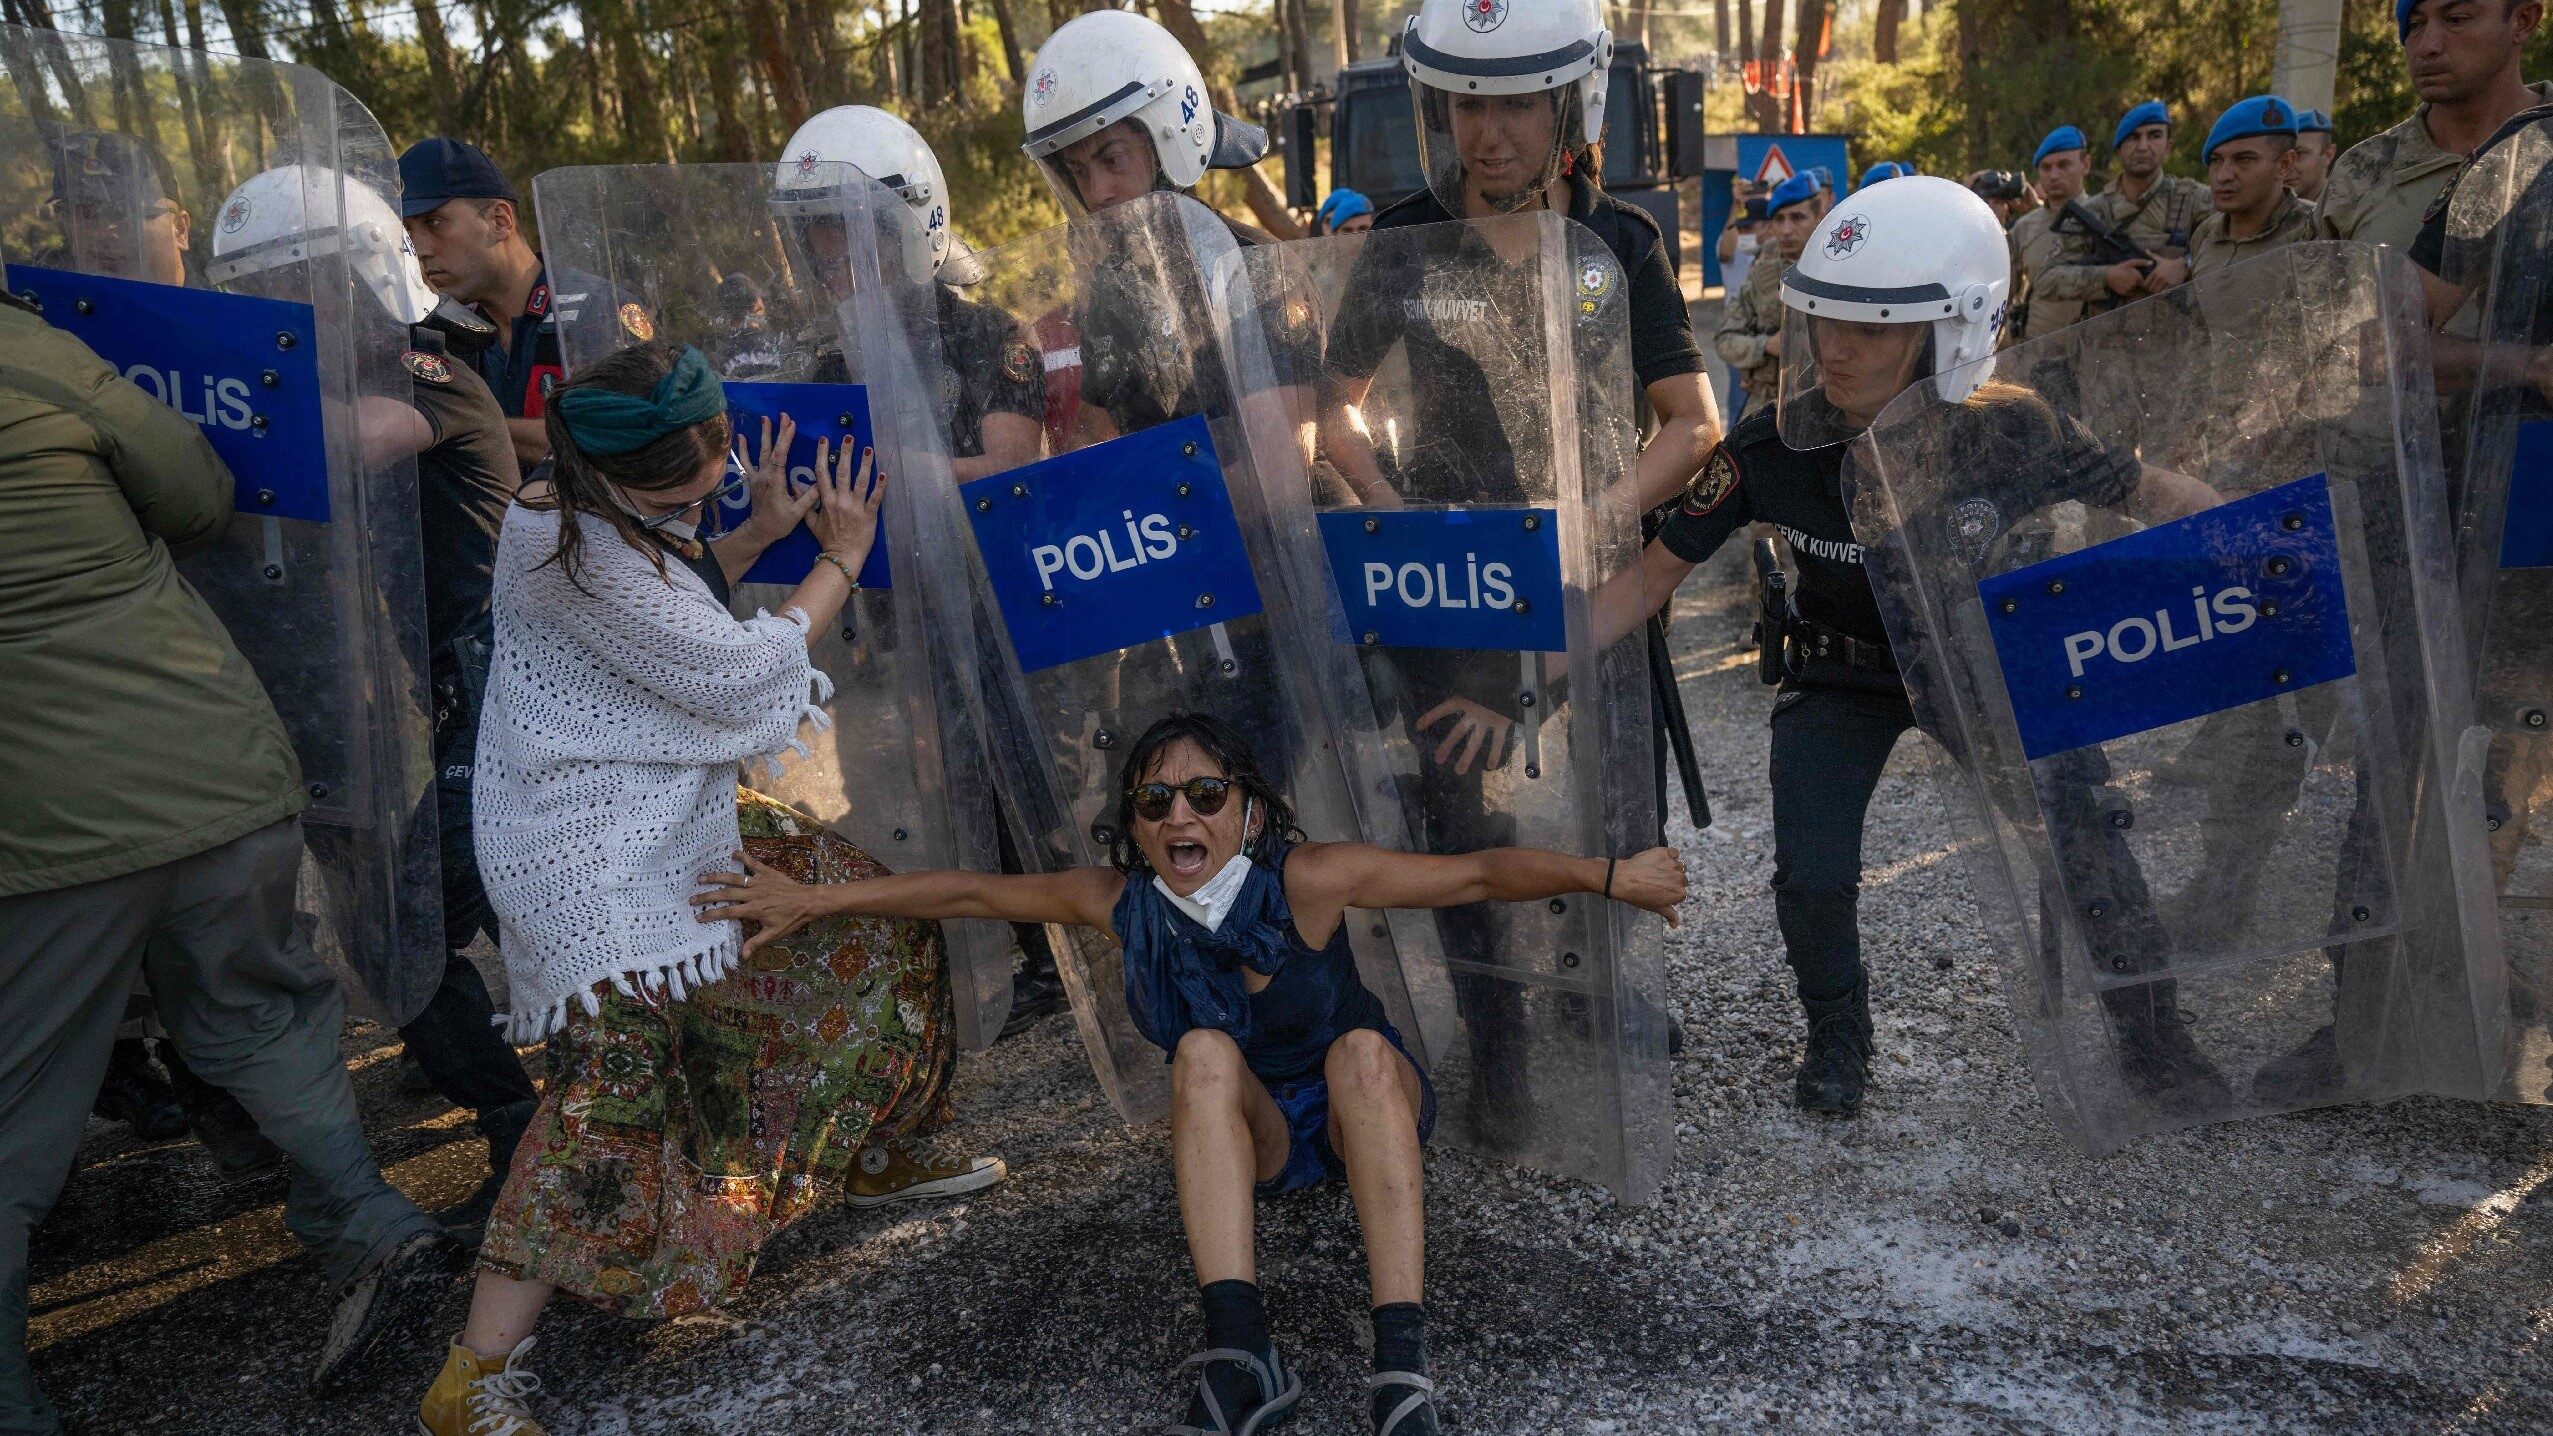 Protesters Vow To Continue Fight To Stop Mine Expansion in Turkish Forest